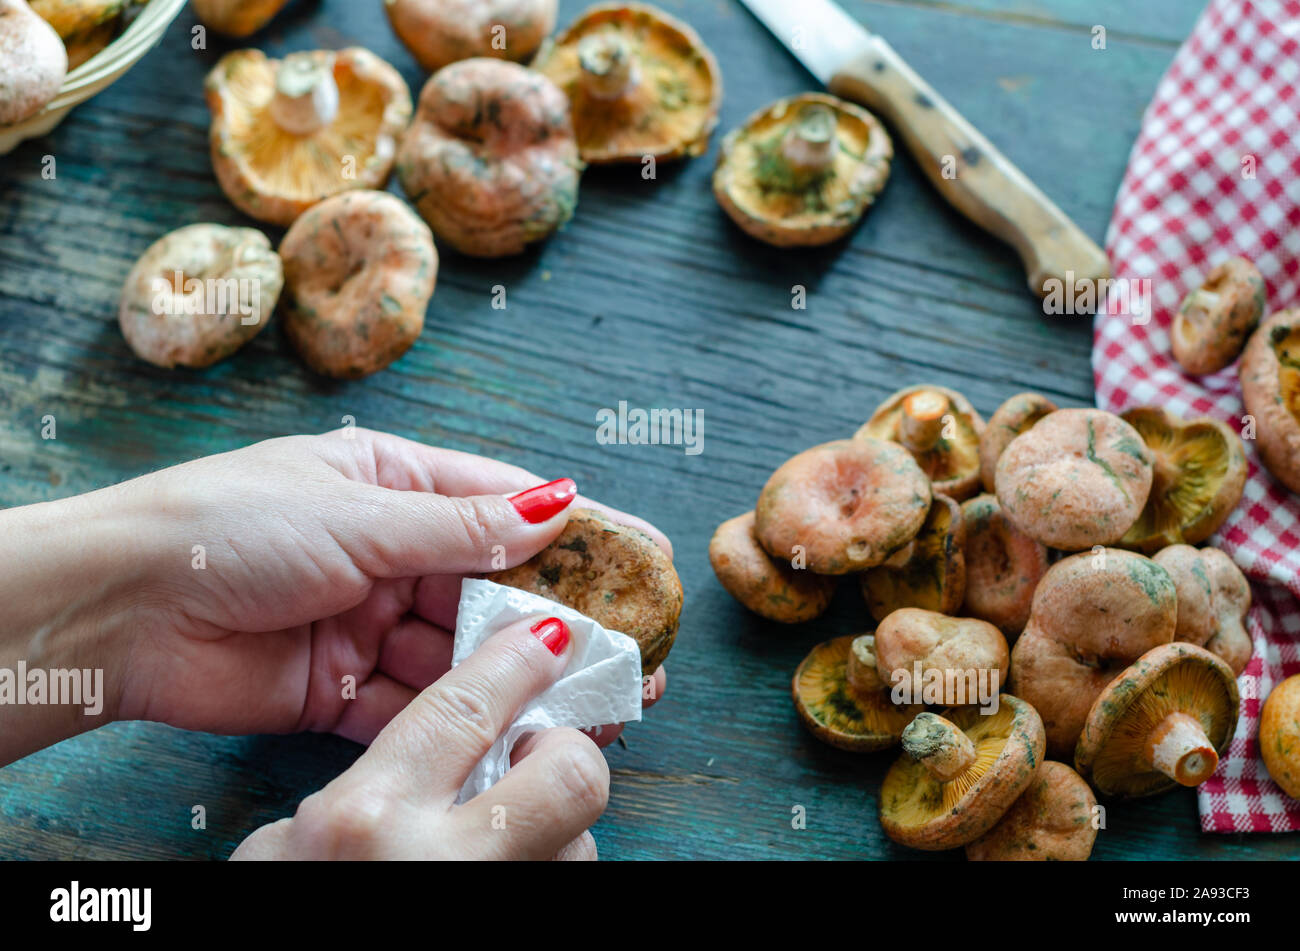 The woman is cleaning mushrooms in the kitchen. Stock Photo